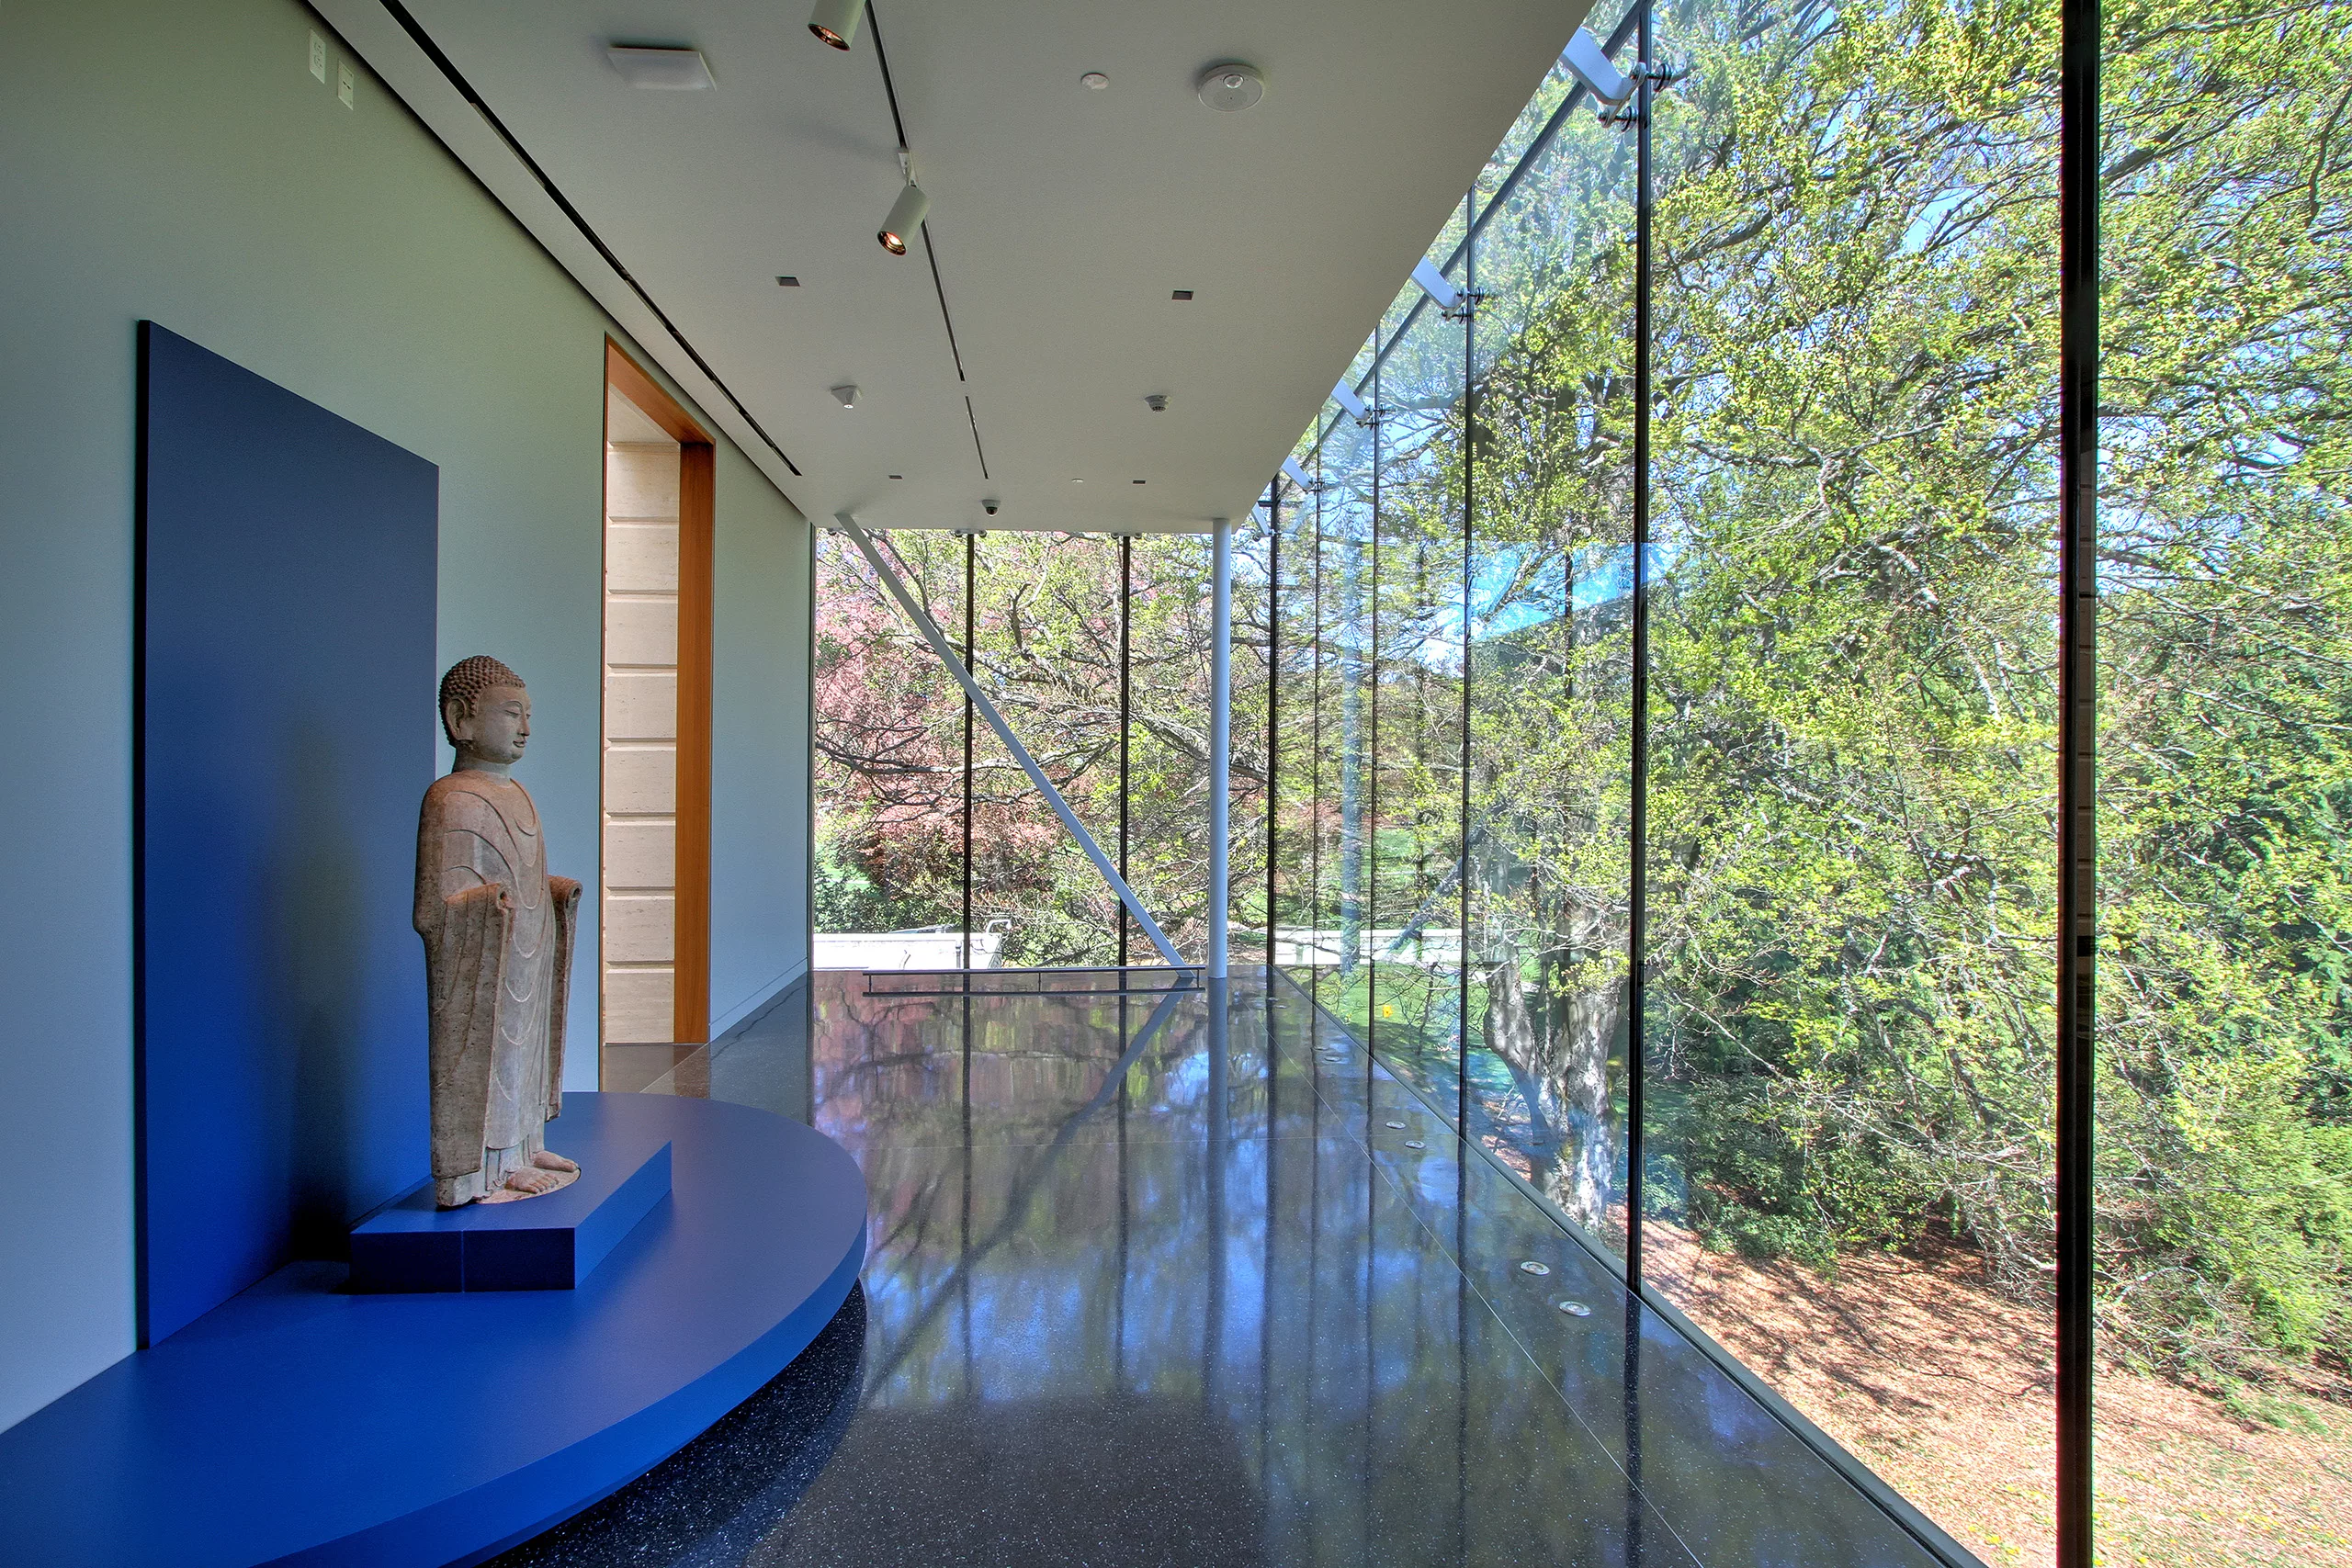 Interior of the Seattle Asian Art Museum Expansion's lobby with a marble sculpture on display and views of Volunteer Park's surrounding trees and landscape through floor-to-ceiling windows